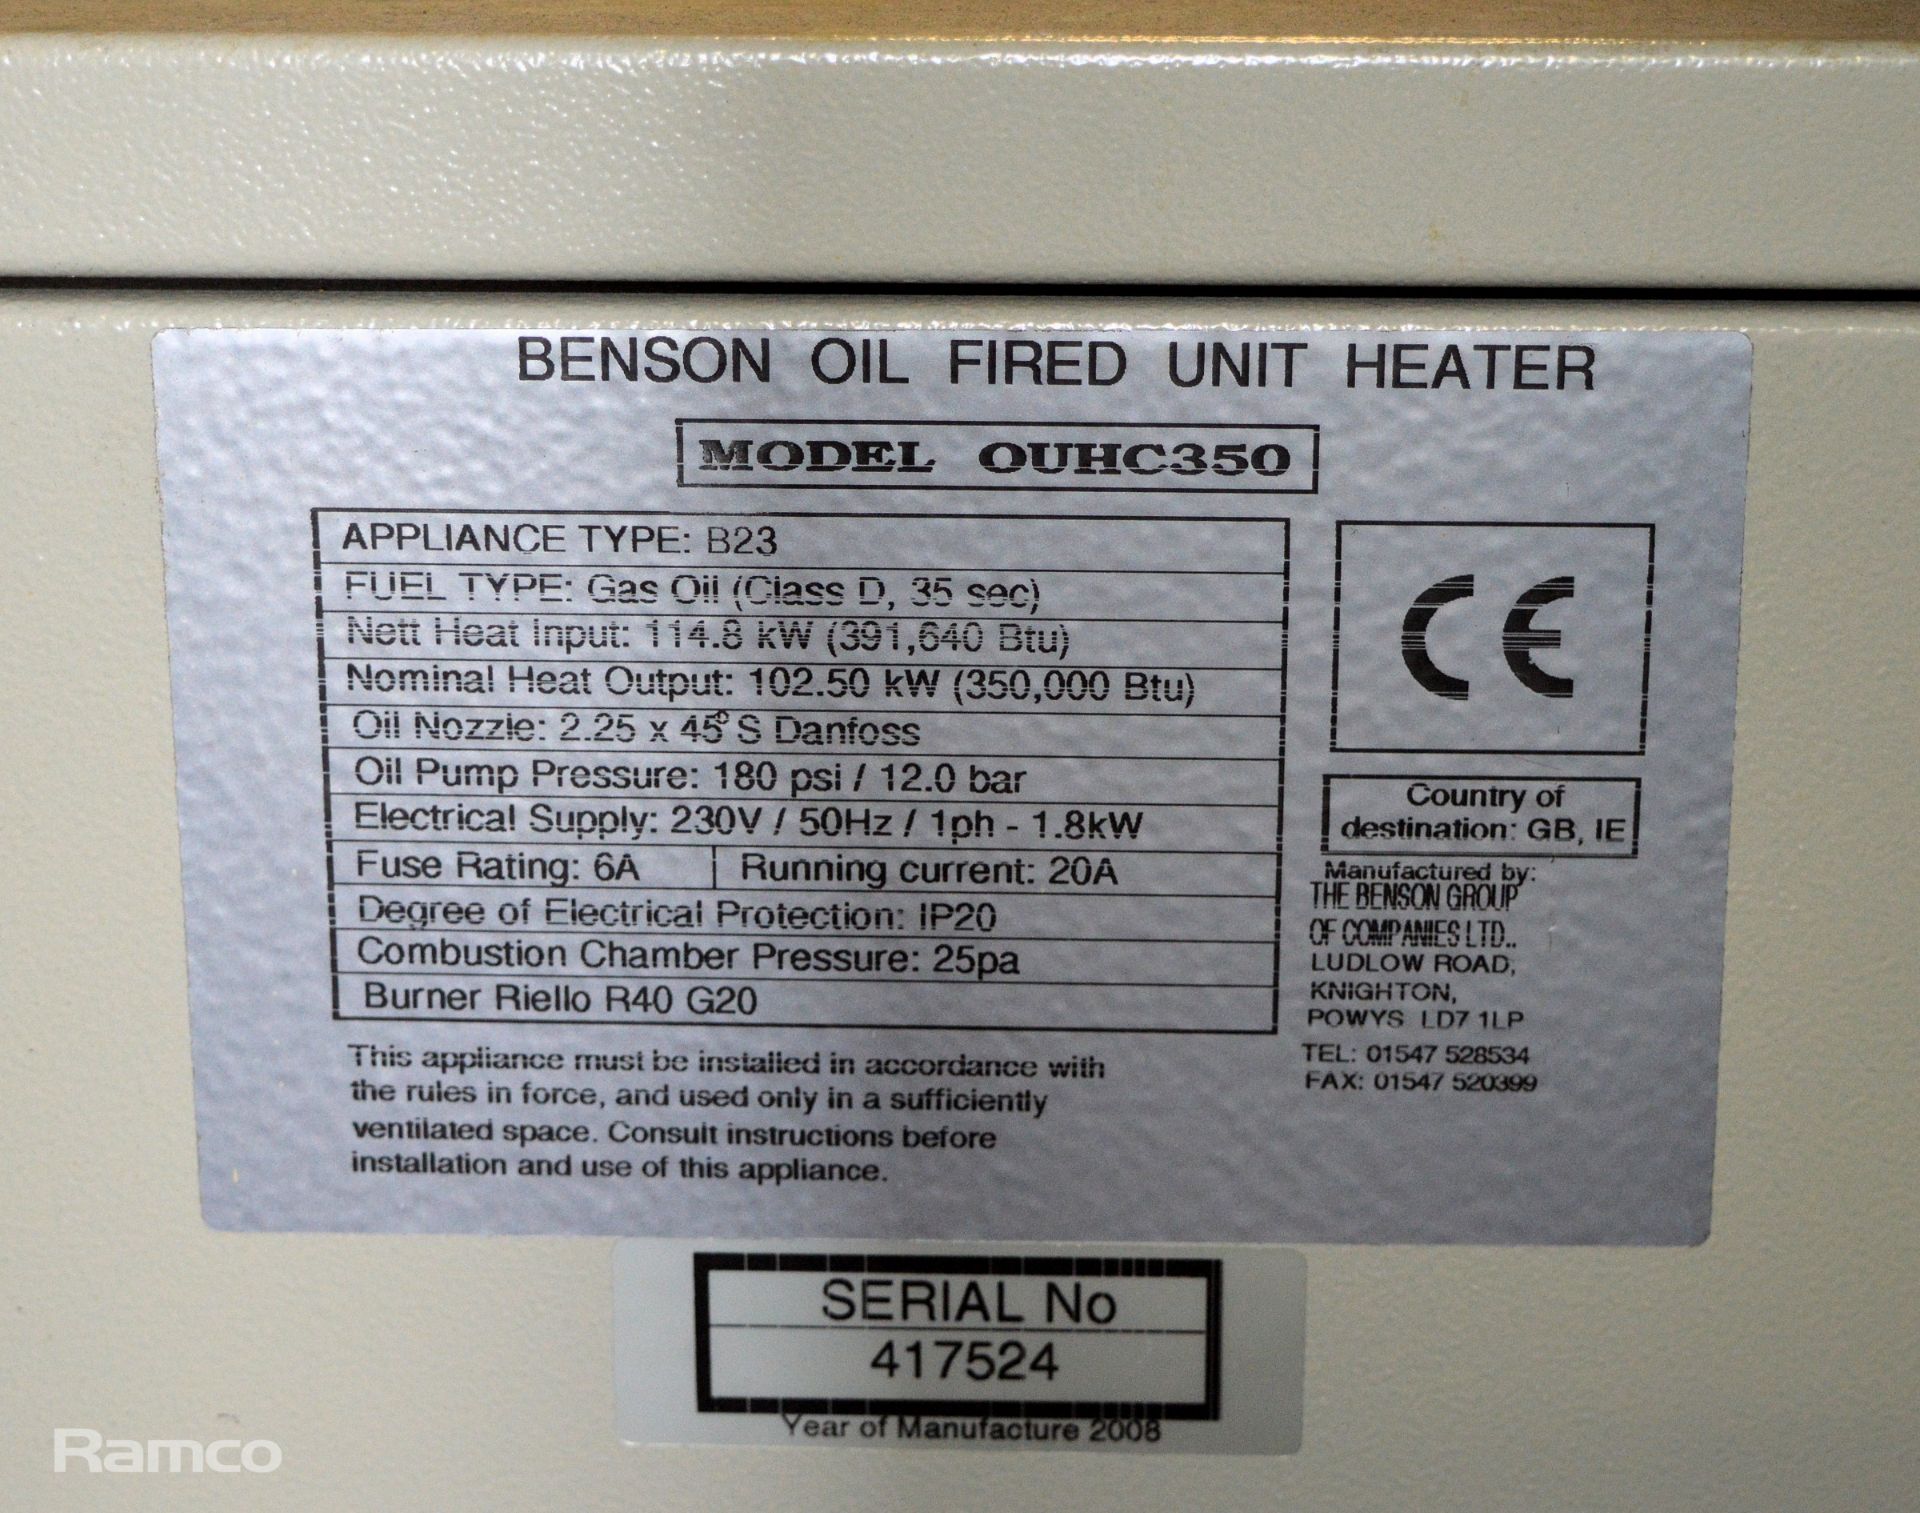 Benson oil fired unit heater - model OUHC350 - type B23 - Image 5 of 5